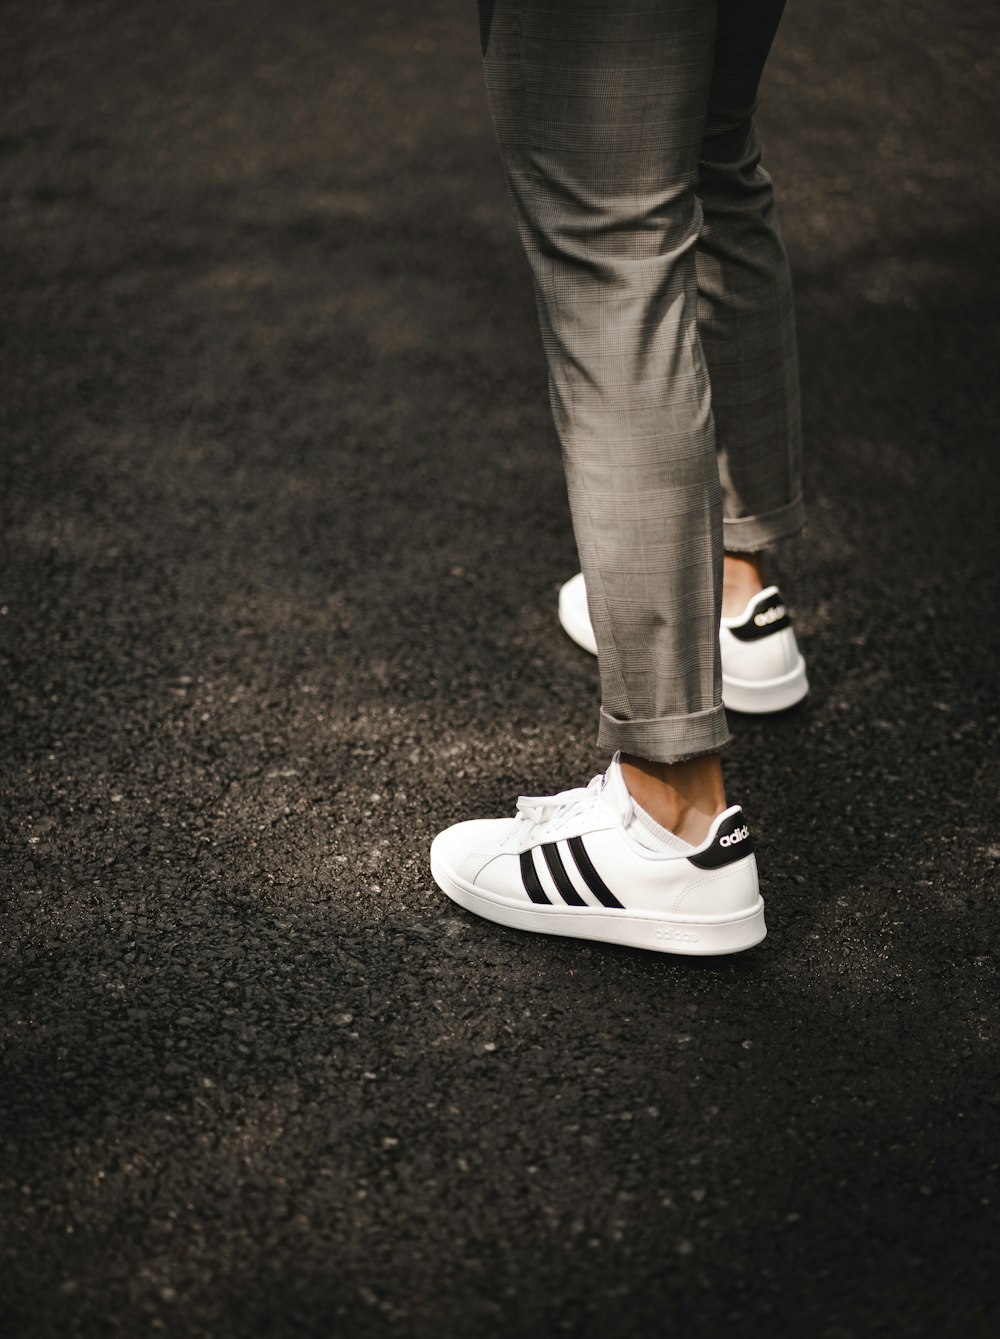 person in gray pants wearing white and black sneakers photo – Free Shoe  Image on Unsplash